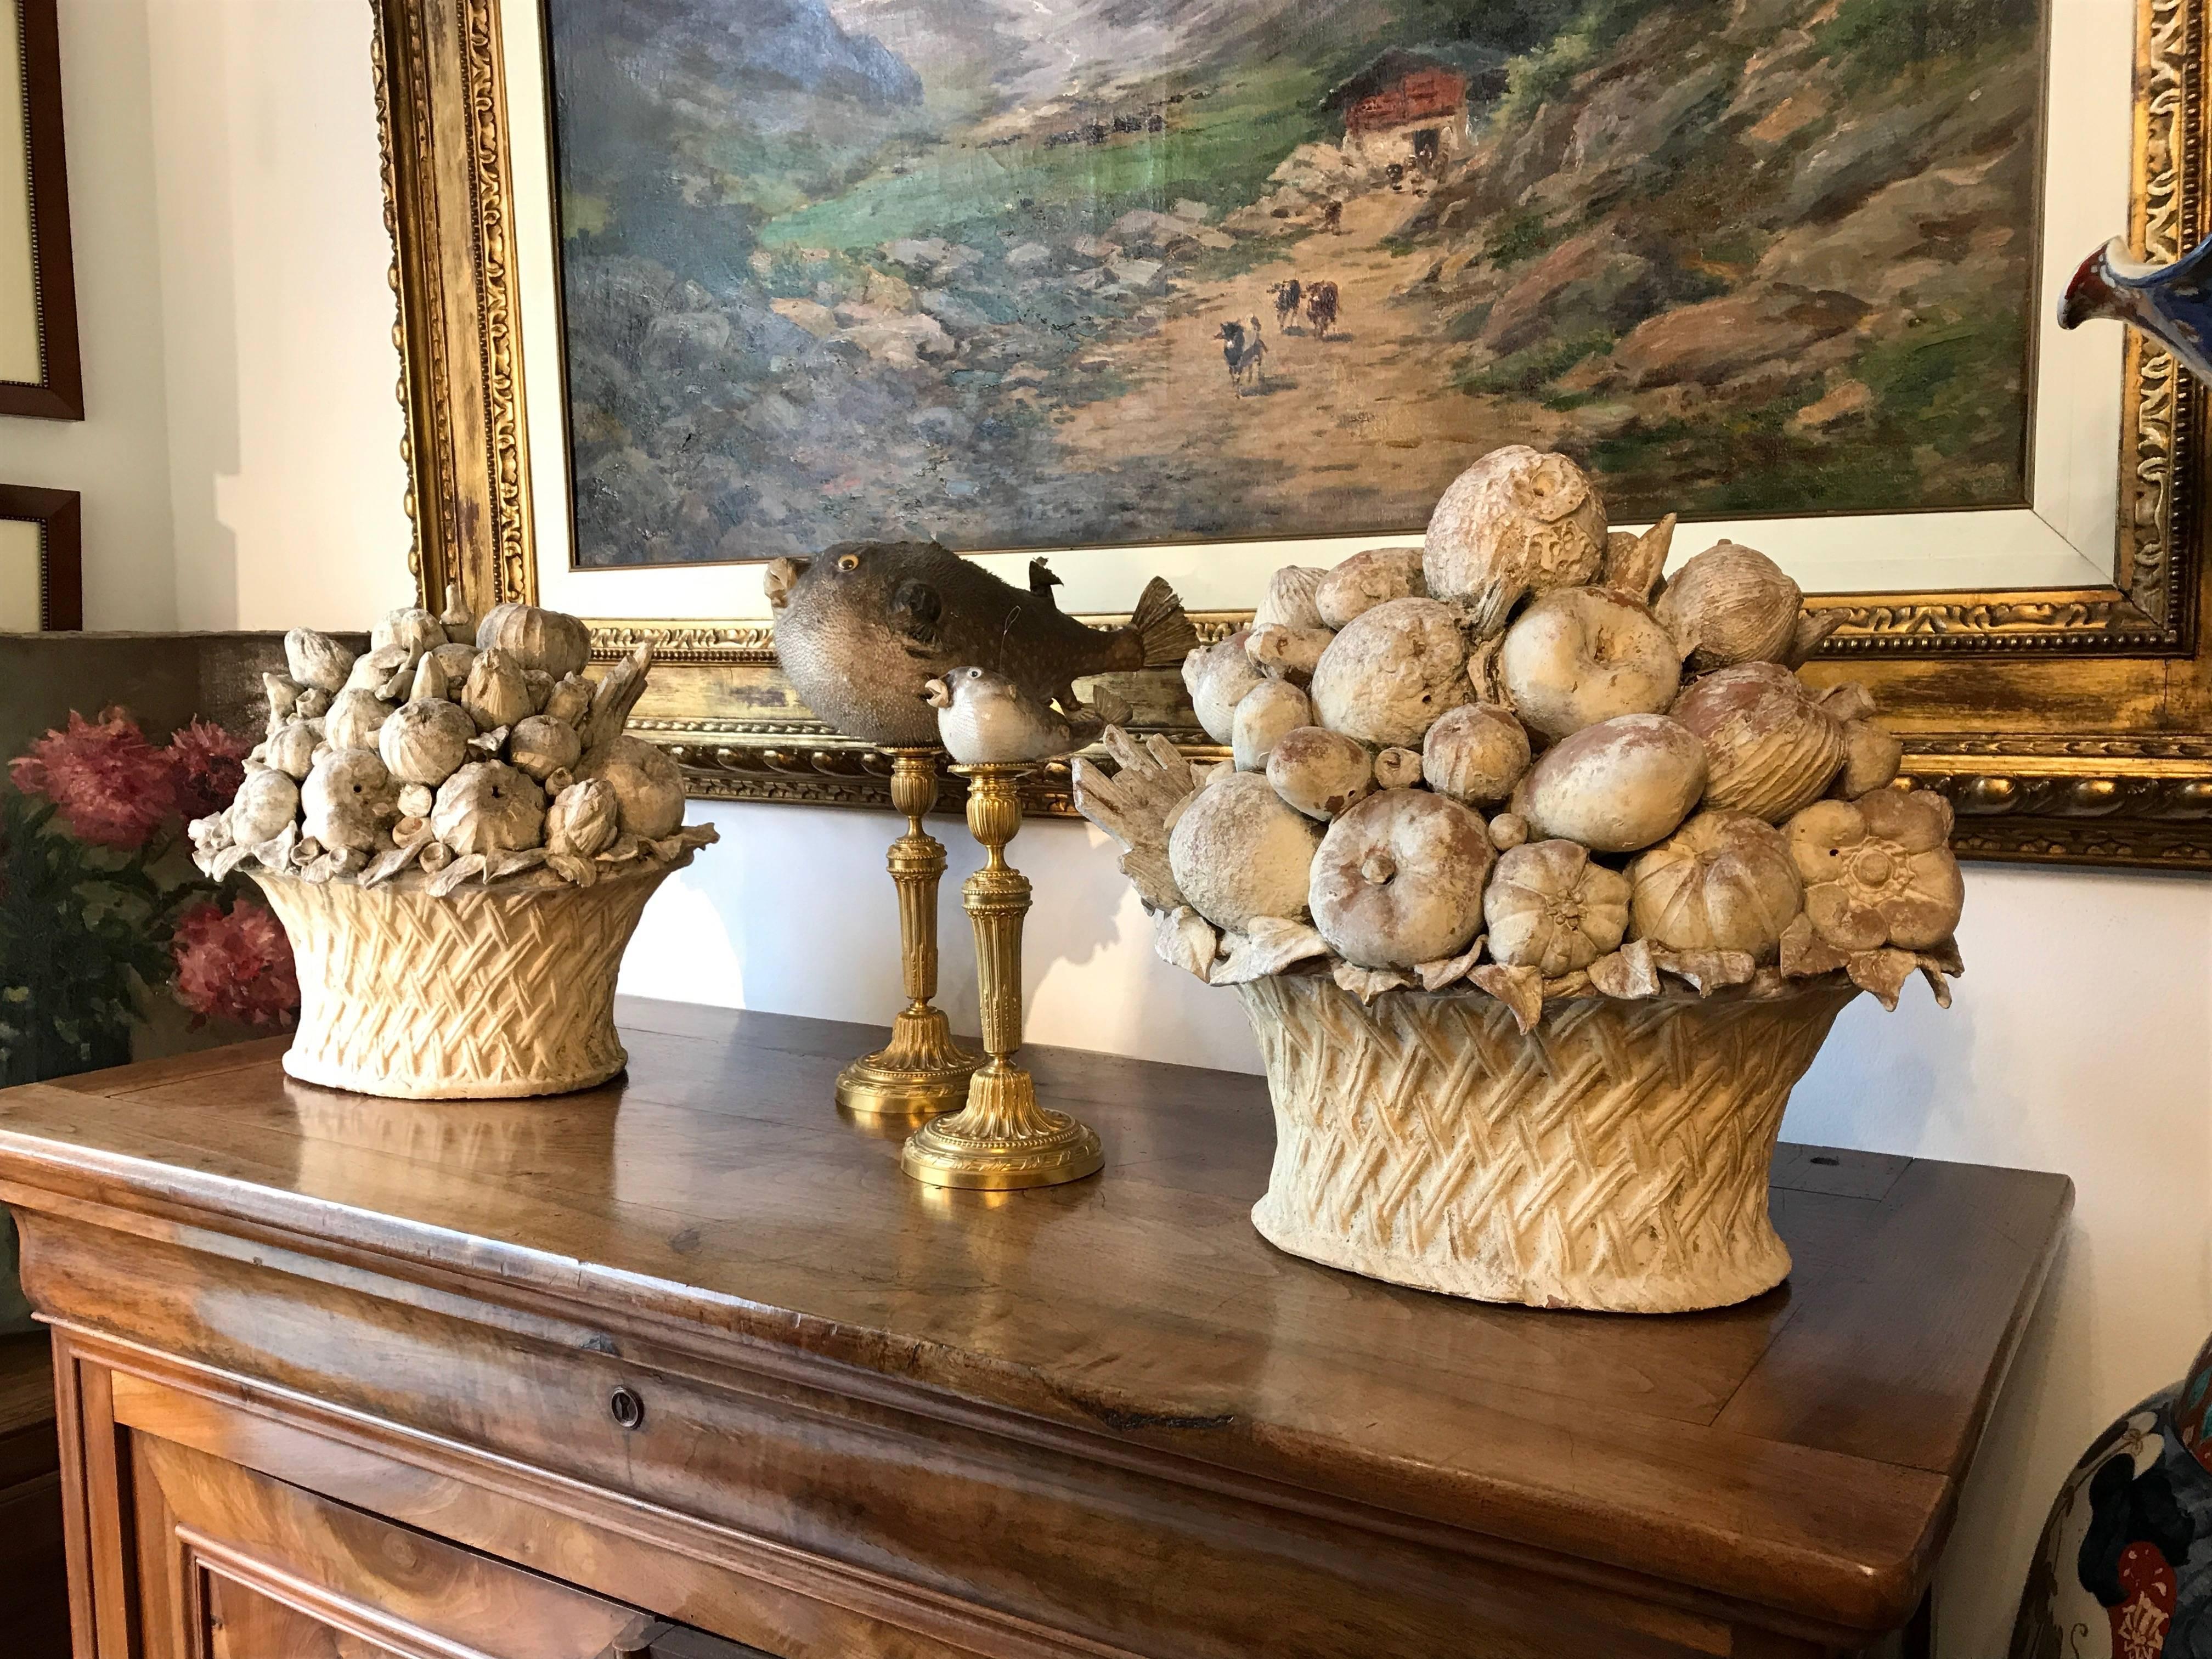 A charming pair of mid-20th century terracotta fruit and vegetable baskets, ideal as garden elements or indoors, as original centerpieces. These large terracotta sculptures, realized by the precious hands of a Tuscan artisan circa 1970s, are